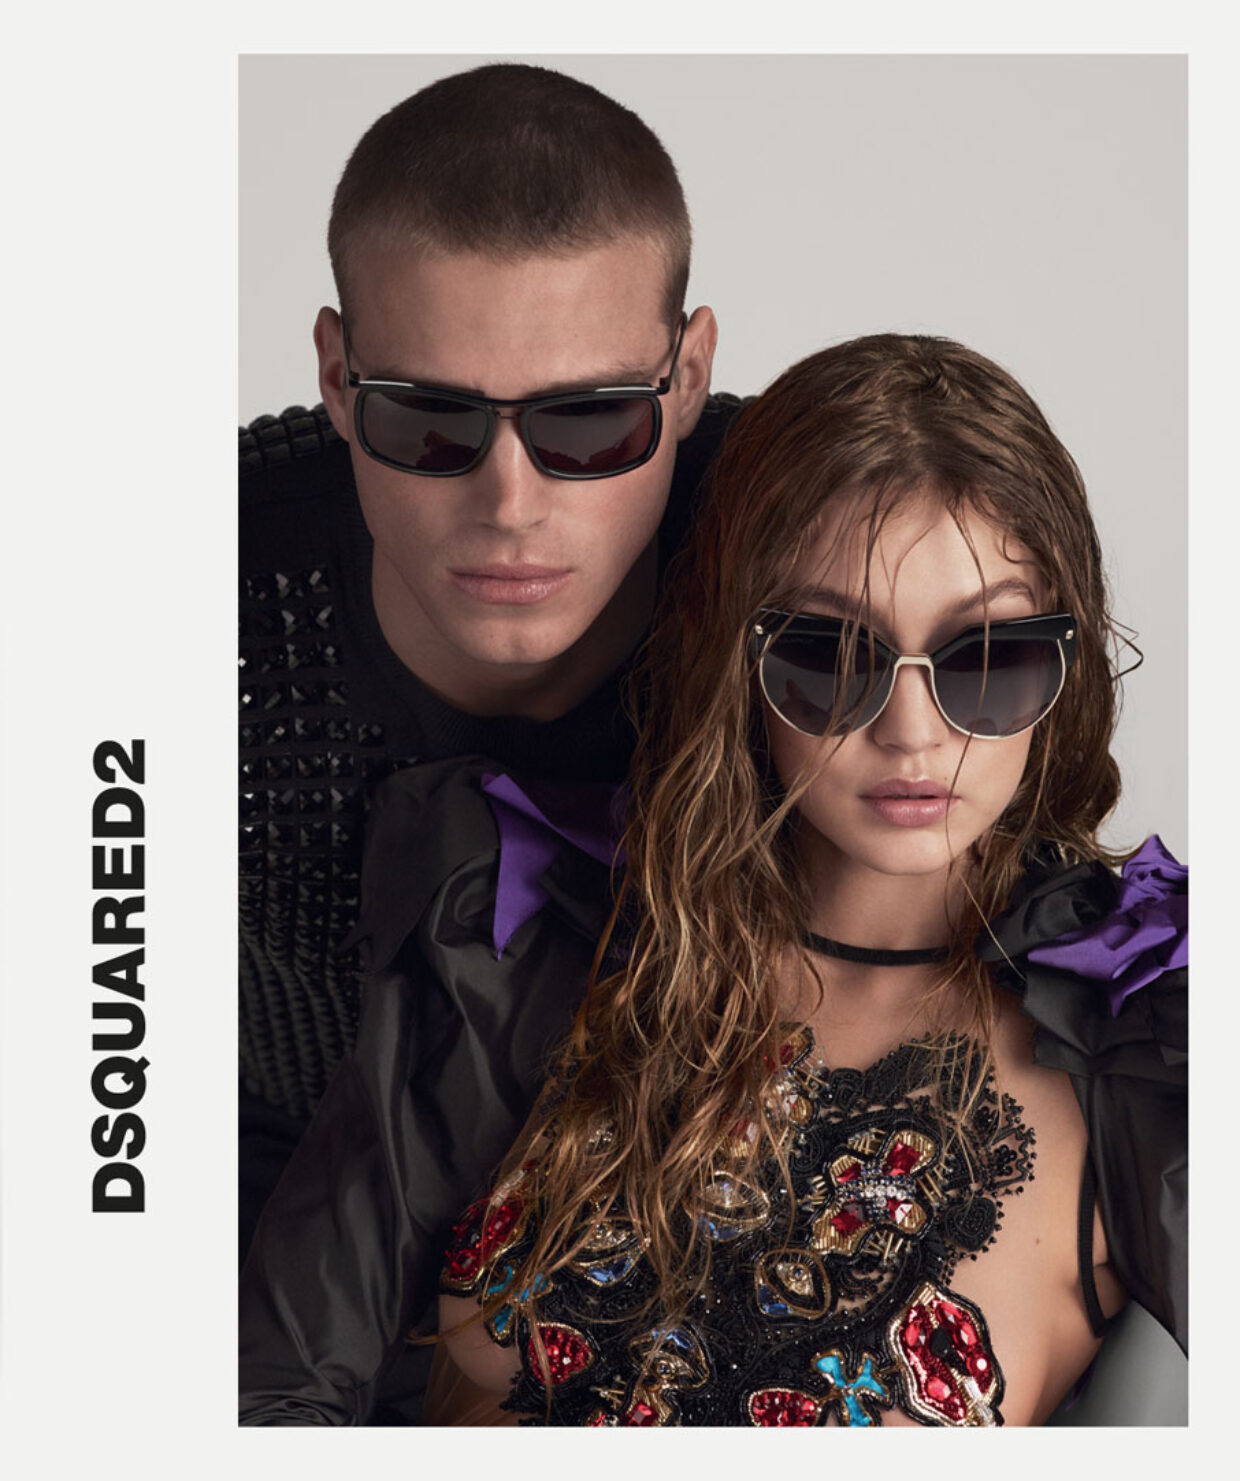 DSquared2 Spring Summer 2017 Ad Campaign Art Directed by Giovanni Bianco | 2